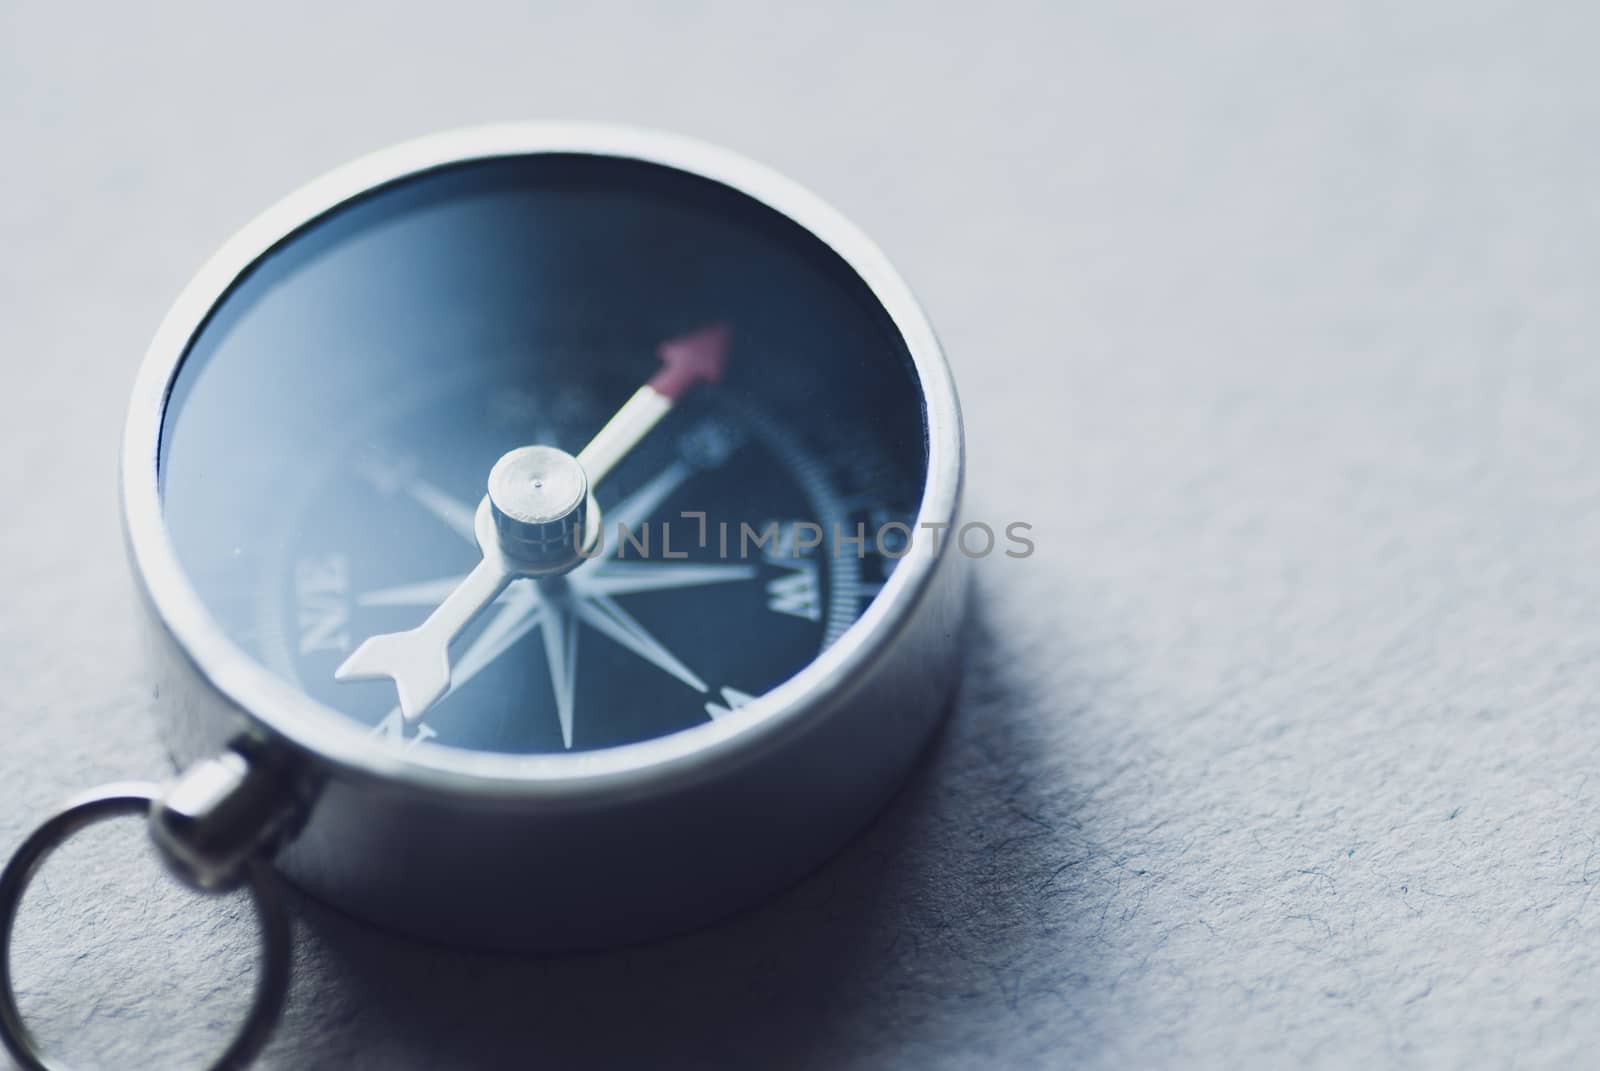 Small metallic magnetic compass on textured grey background for navigation or direction finding with lateral copy space